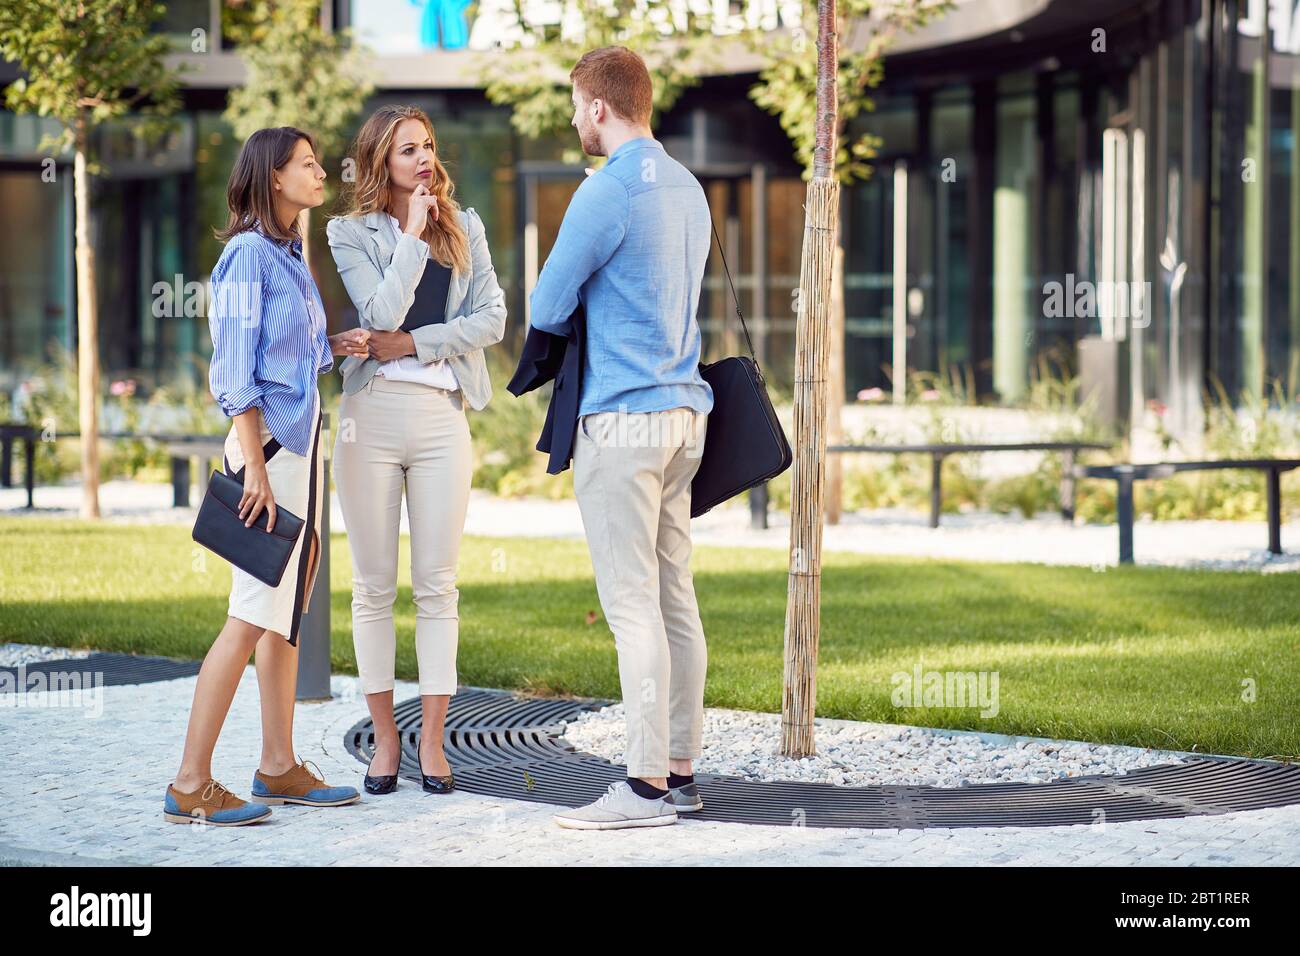 group of young business people talking in front of a building. two female and one male colleague Stock Photo